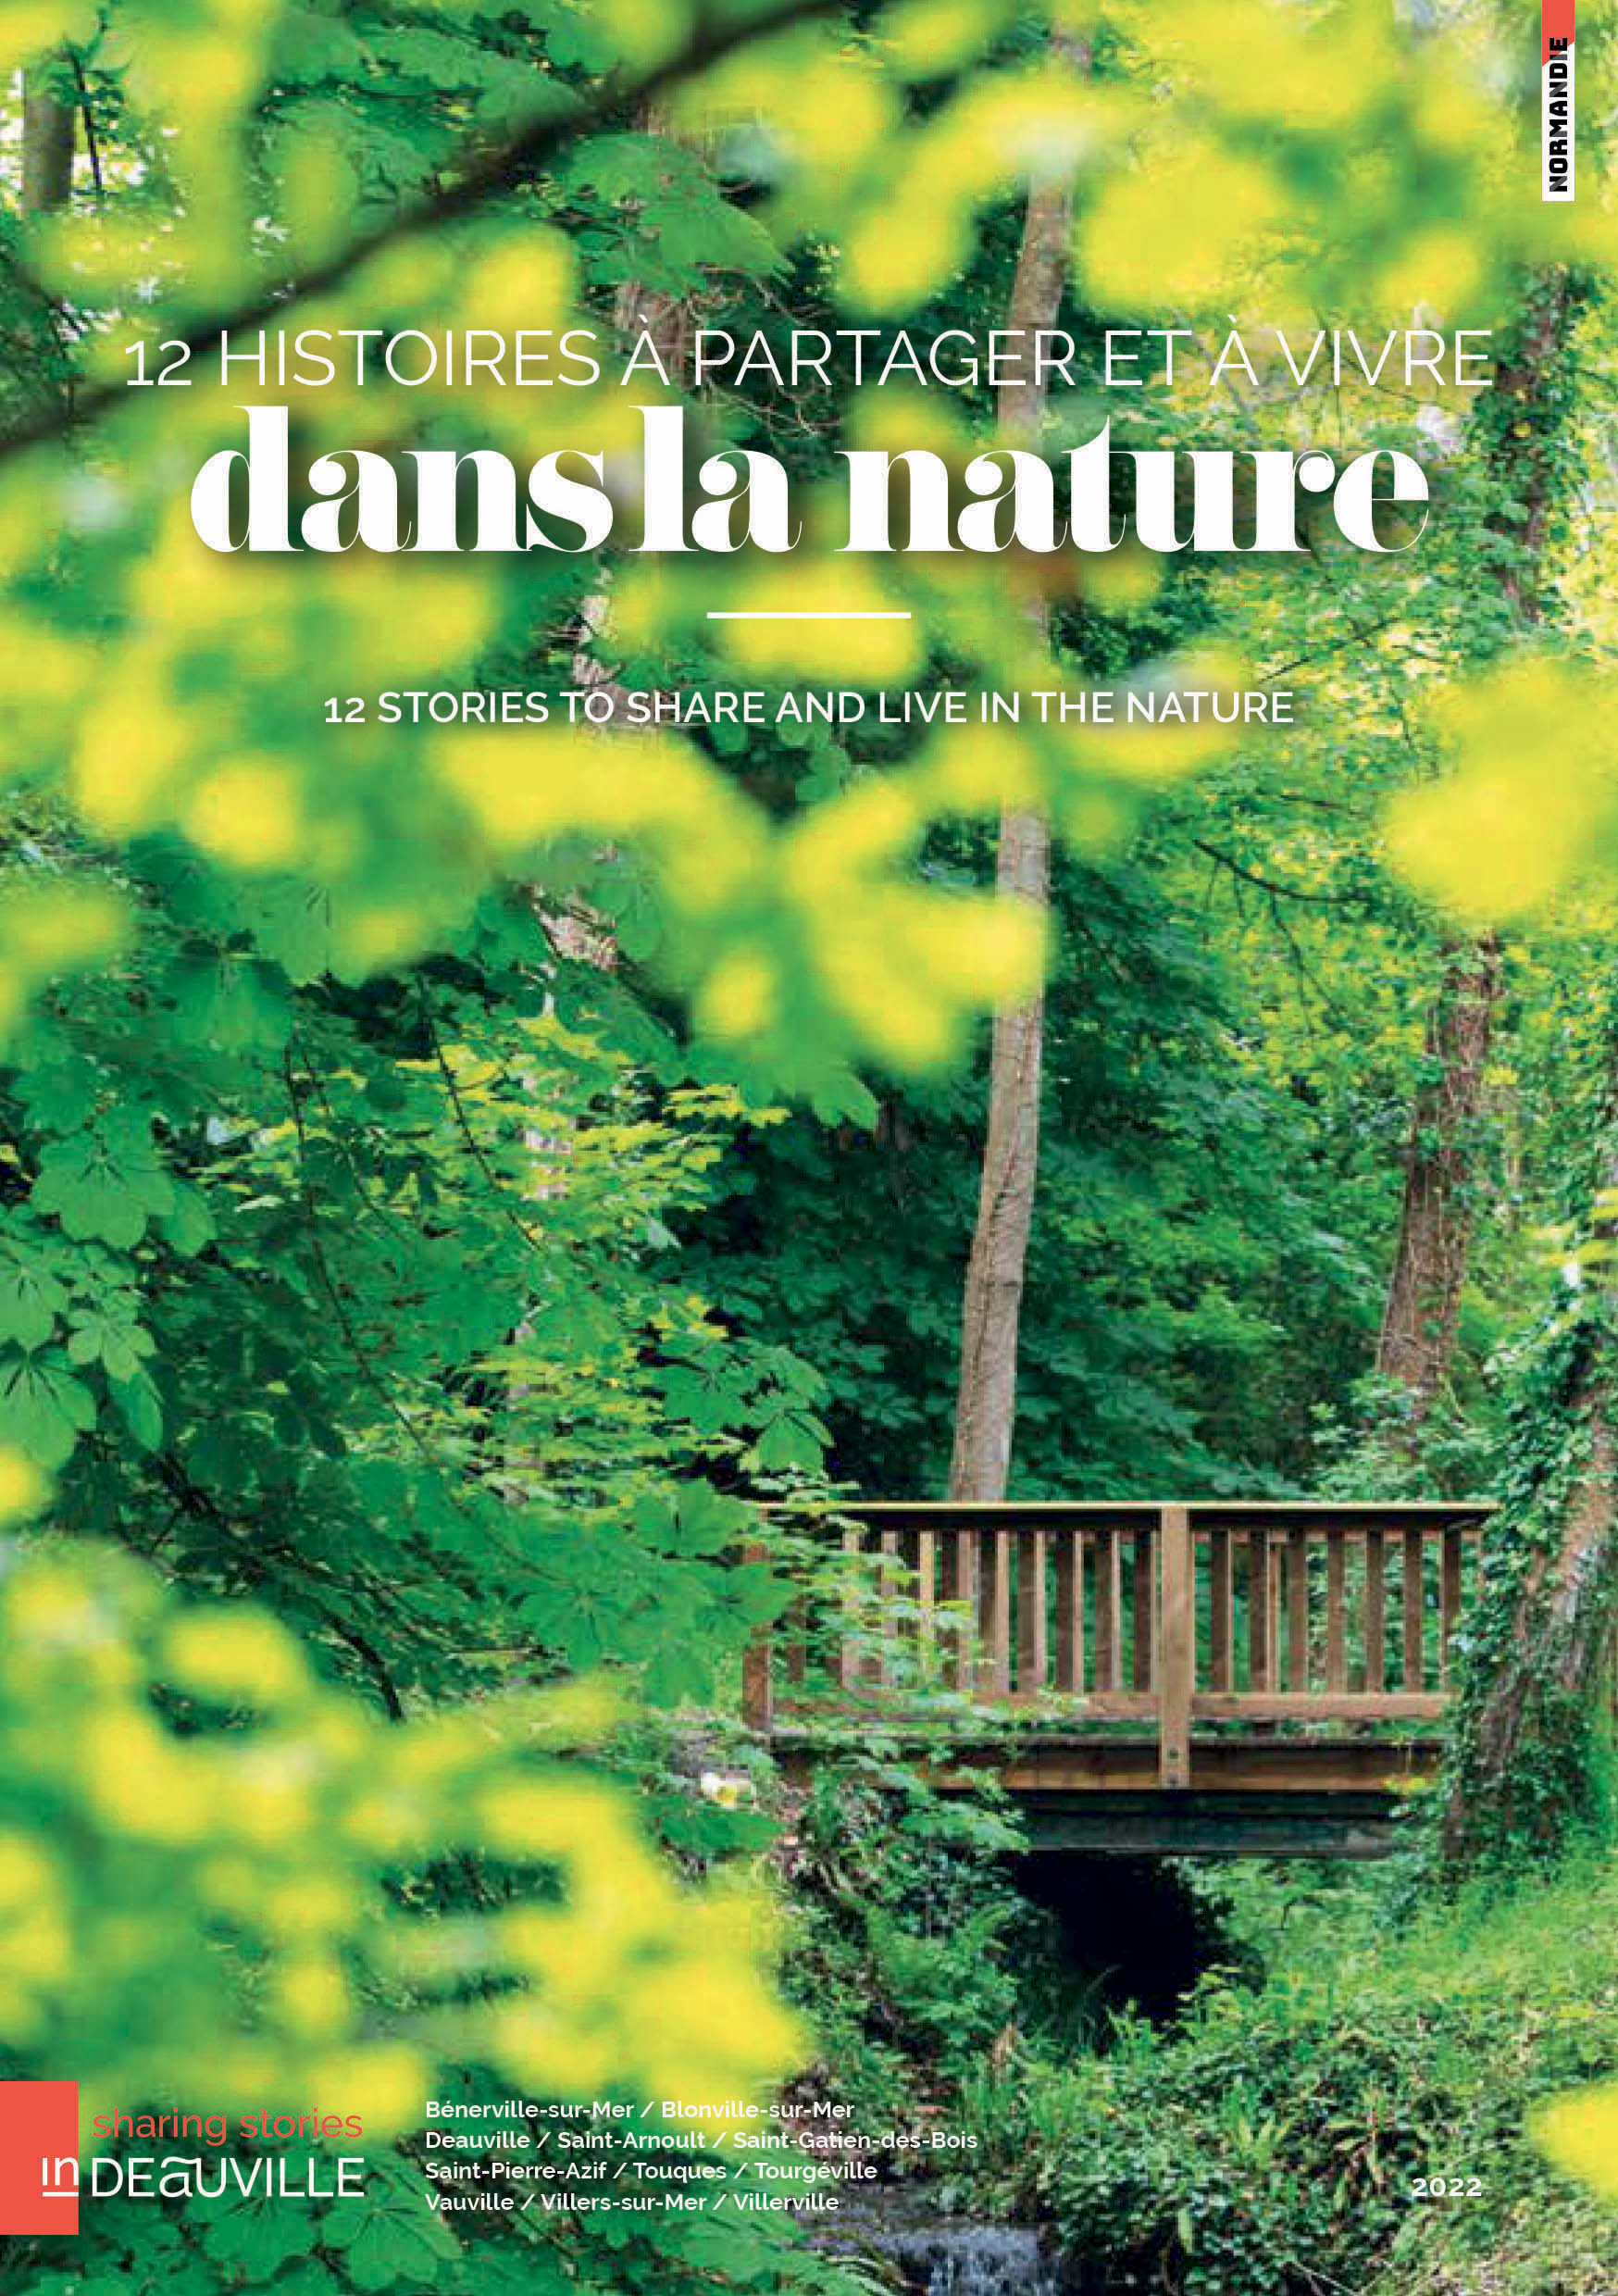 Guide nature inDeauville © Lucile Loisel